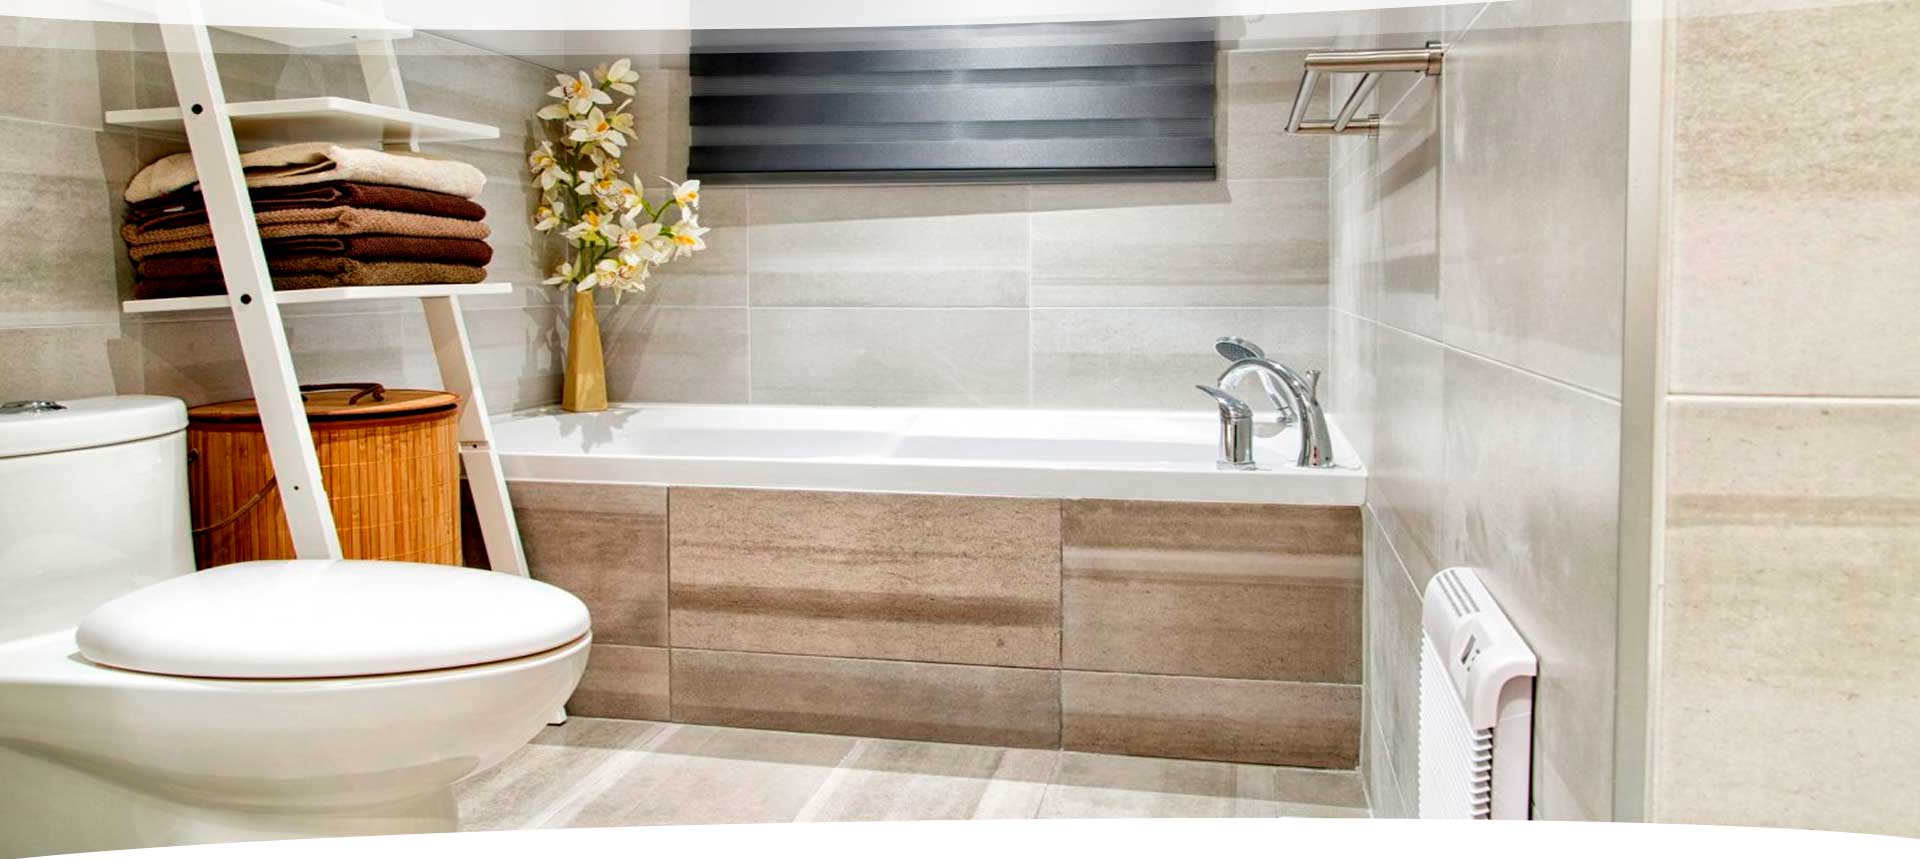 Fiberglass Bathtubs and Showers Repairs in Port St. Lucie